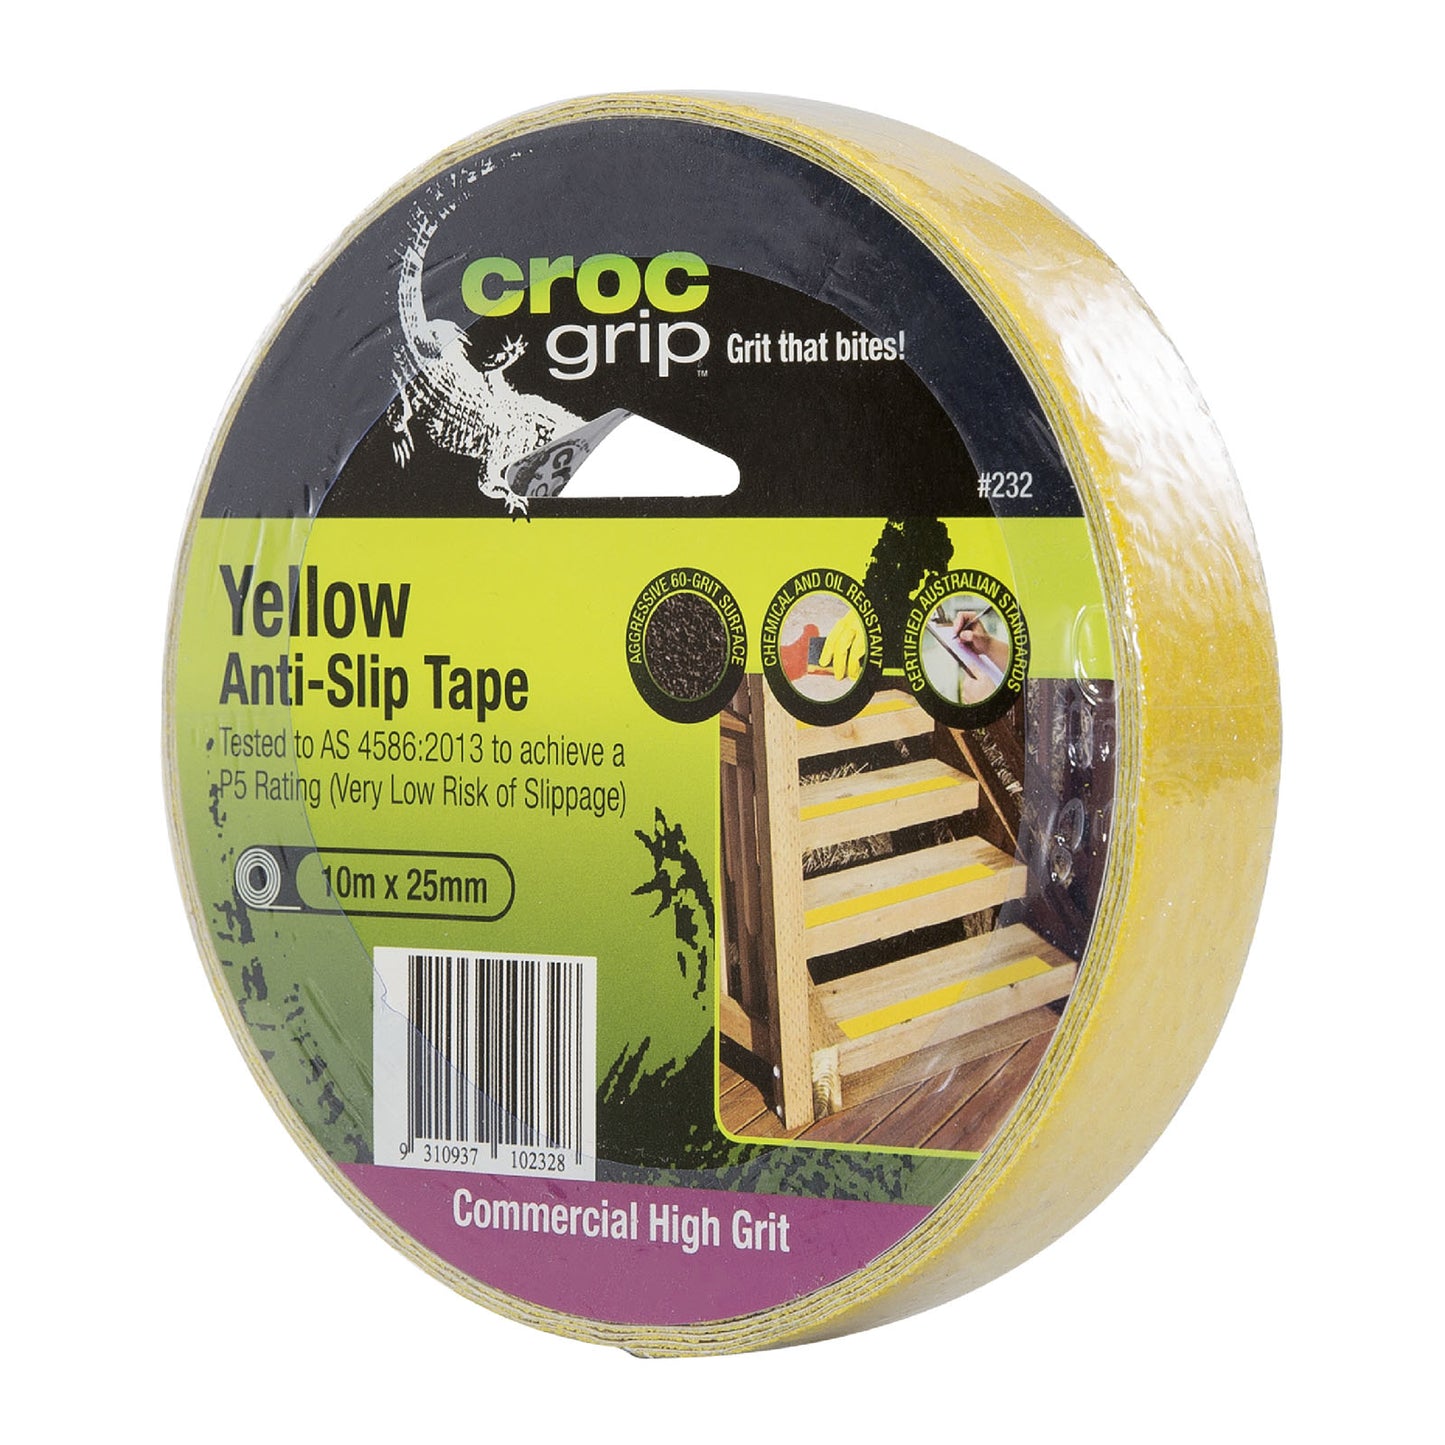 10M x 25MM Yellow Commercial High Grit Anti-Slip Tape